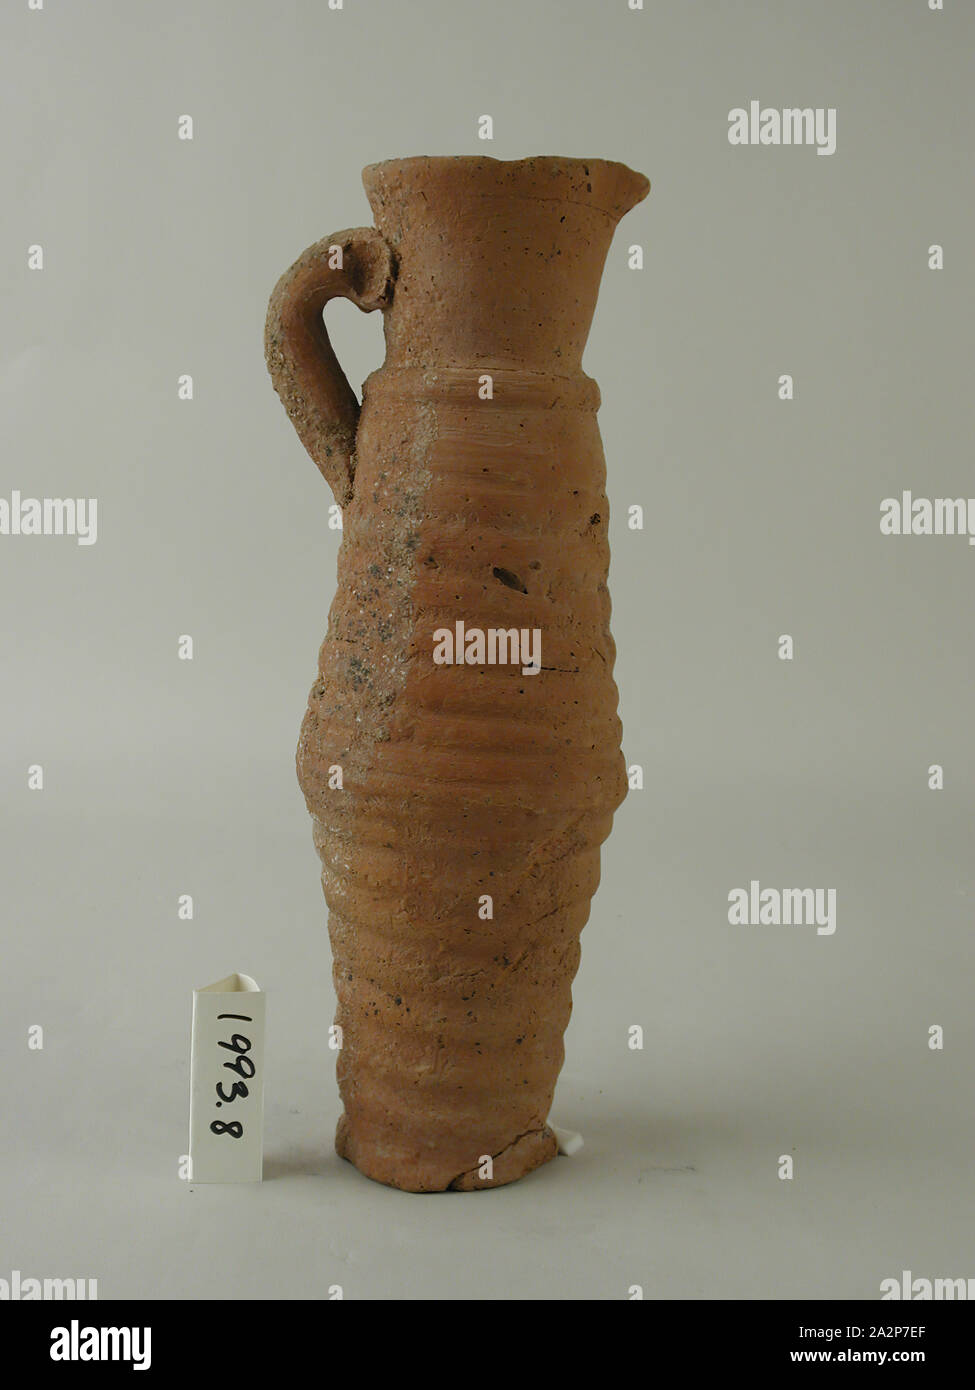 Roman, Jug, between 5th and 6th century CE, ceramic, Overall: 9 1/4 × 3 1/4 × 3 inches (23.5 × 8.3 × 7.6 cm Stock Photo